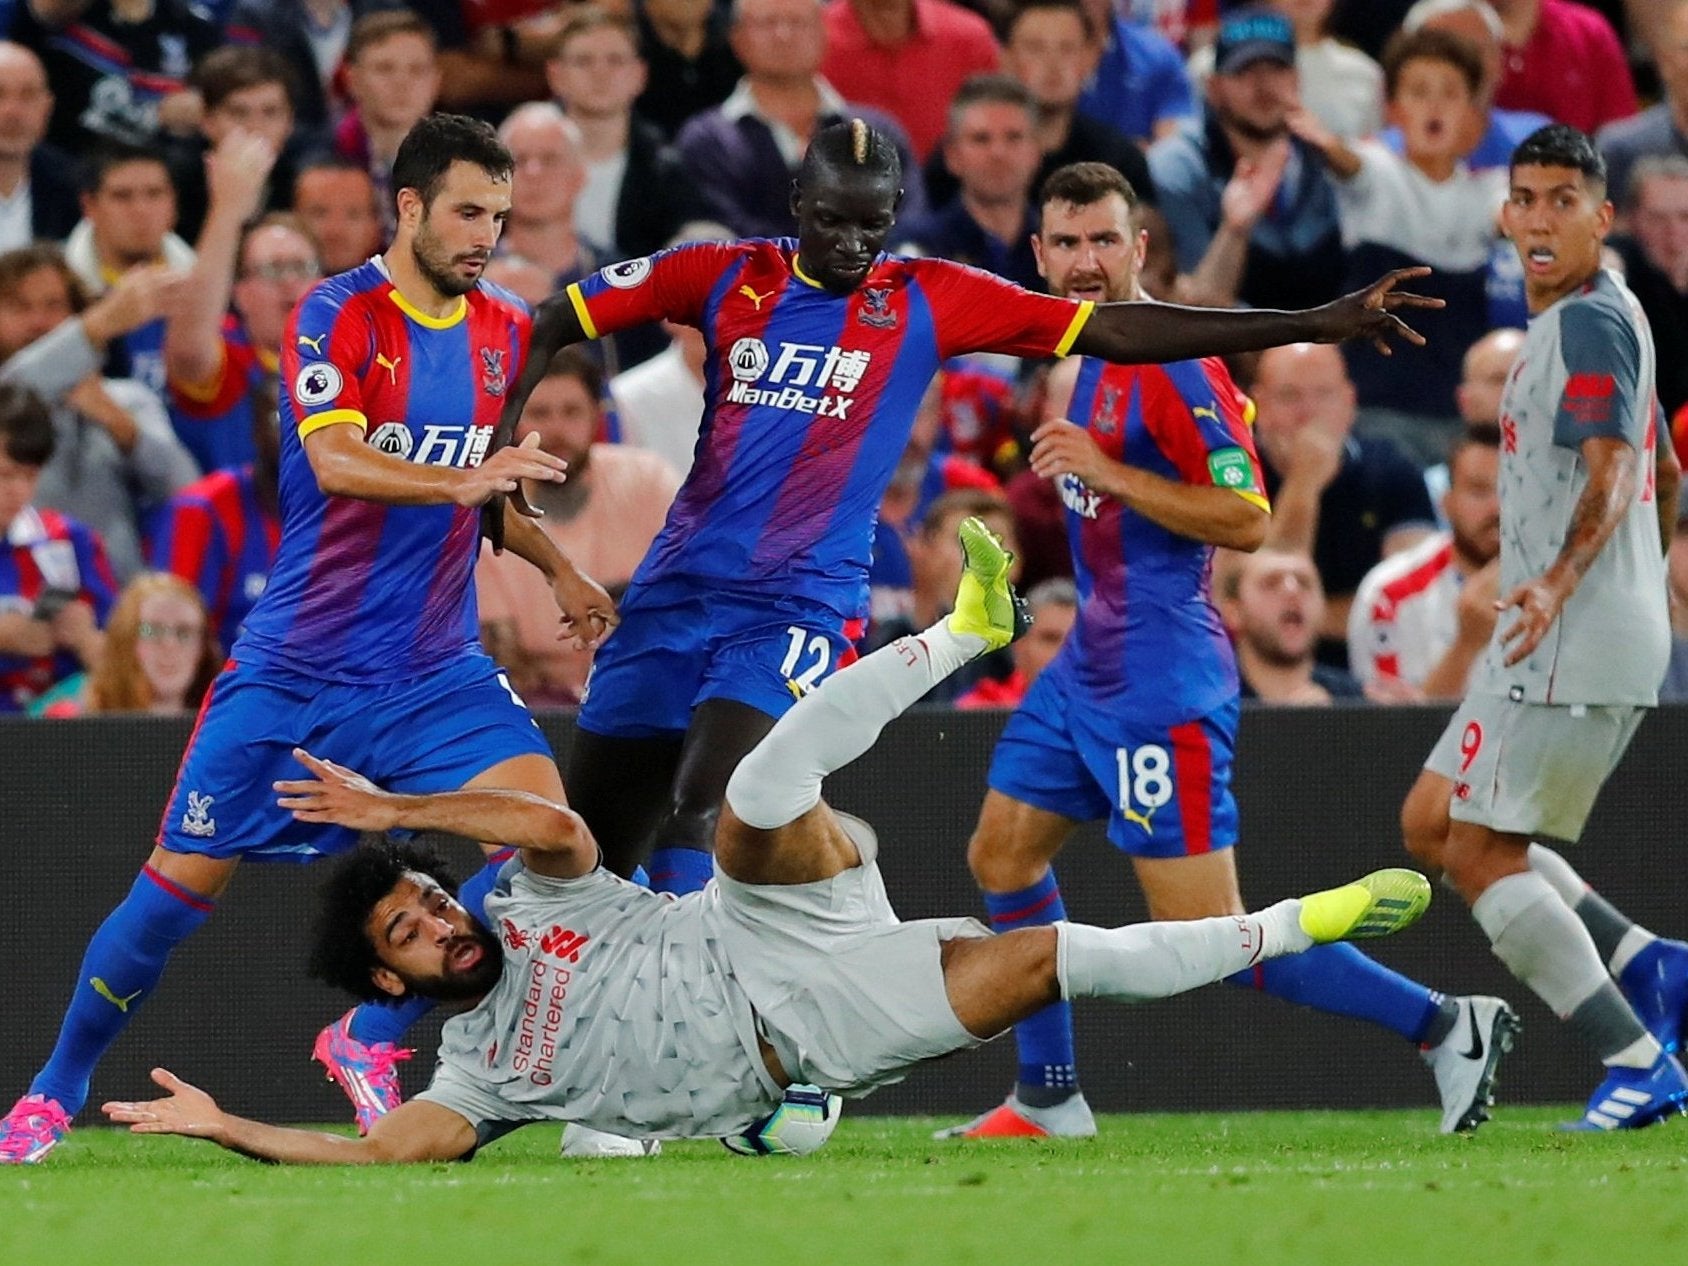 Crystal Palace vs Liverpool: Gary Neville puts Mohamed Salah penalty down to &apos;theatrical fall&apos;